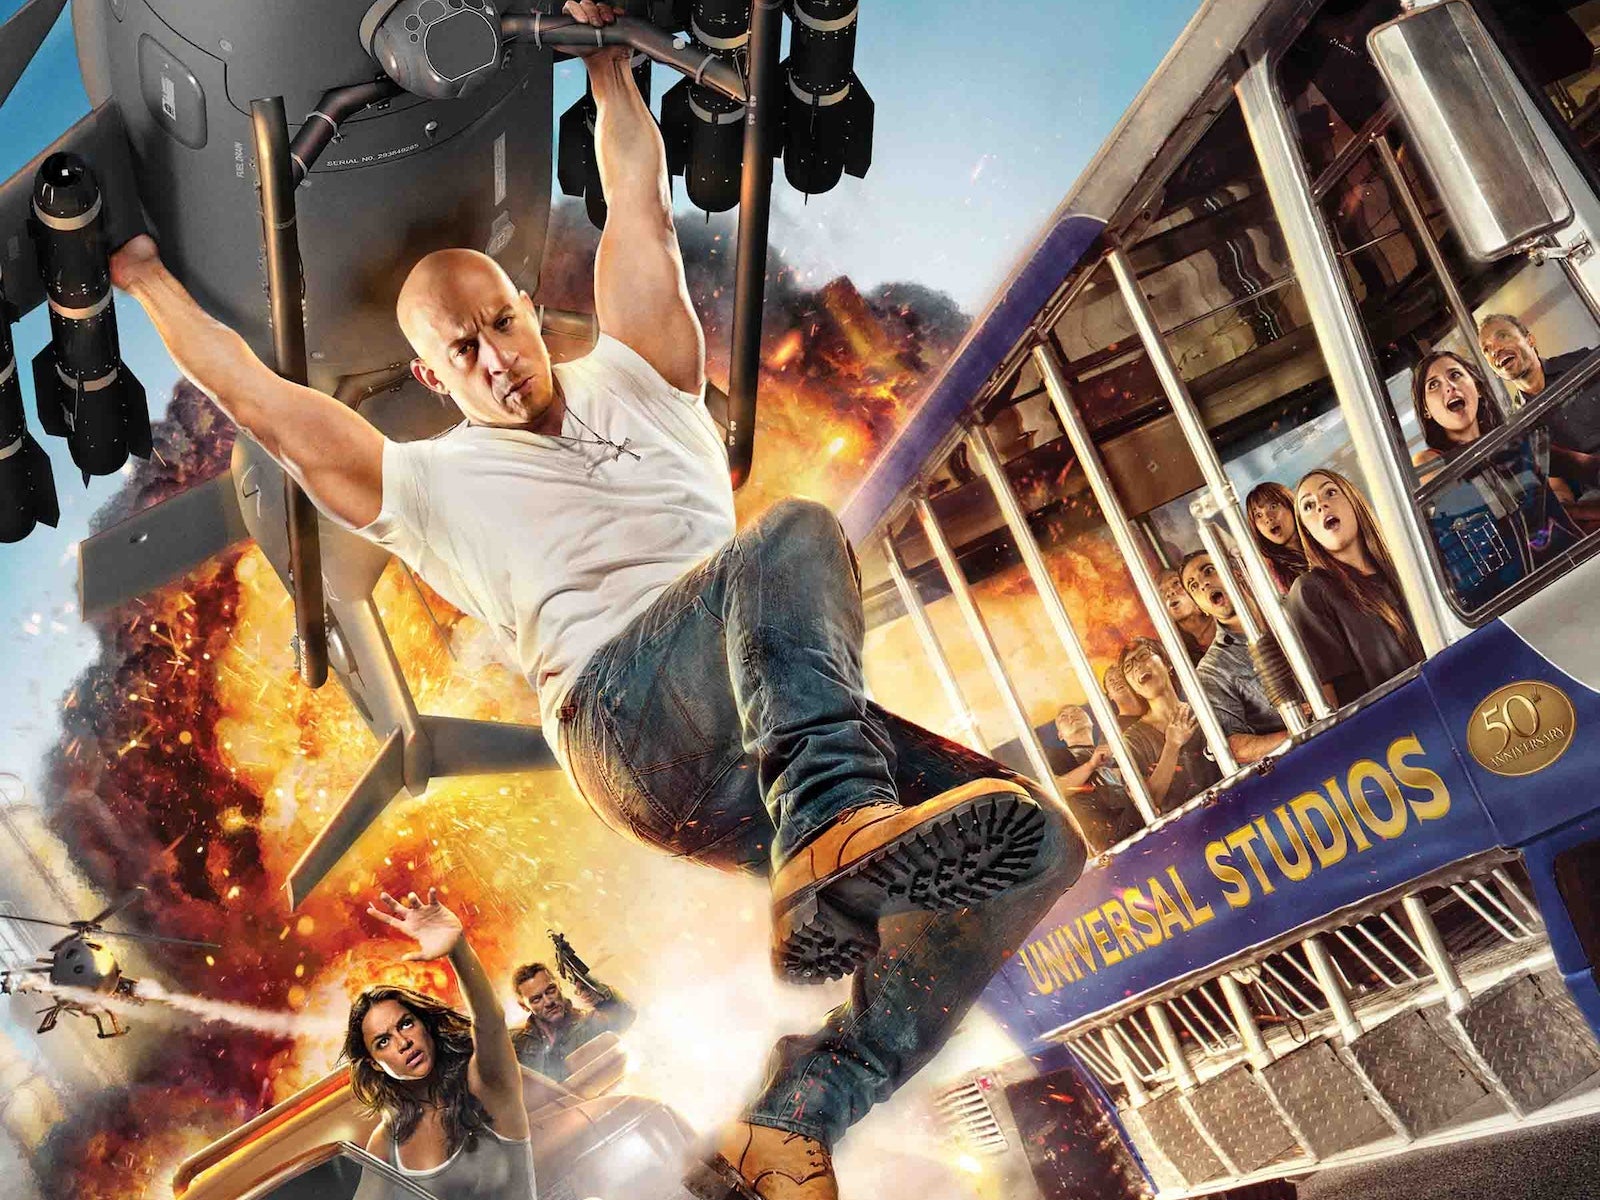 Vin Diesel hanging onto a helicopter as an explosion occurs behind him and people look on in a Universal Studios tour bus